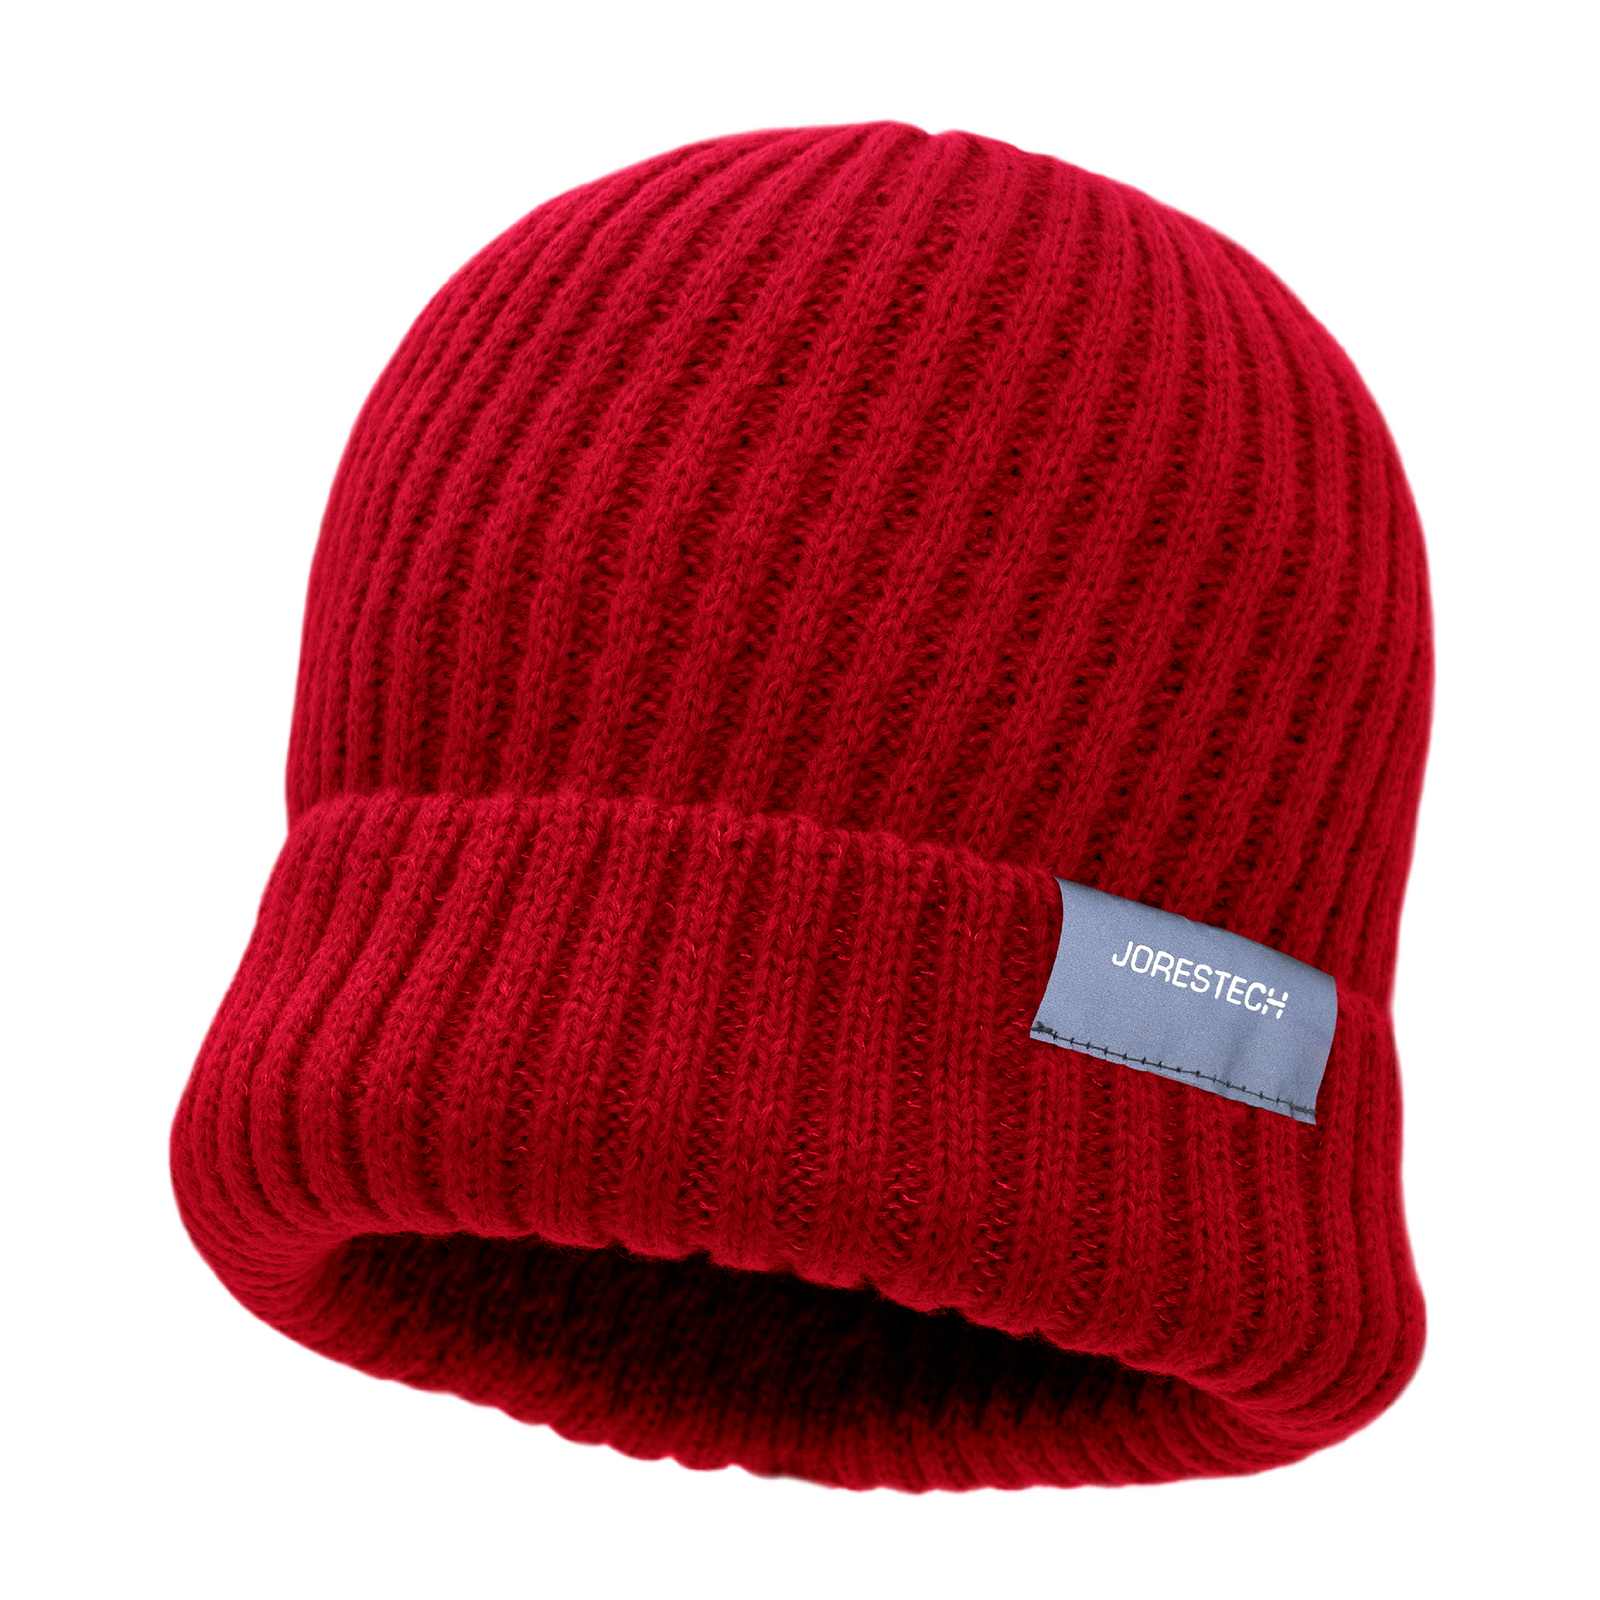 Red Beanie hat with reflective stitching by JORESTECH®